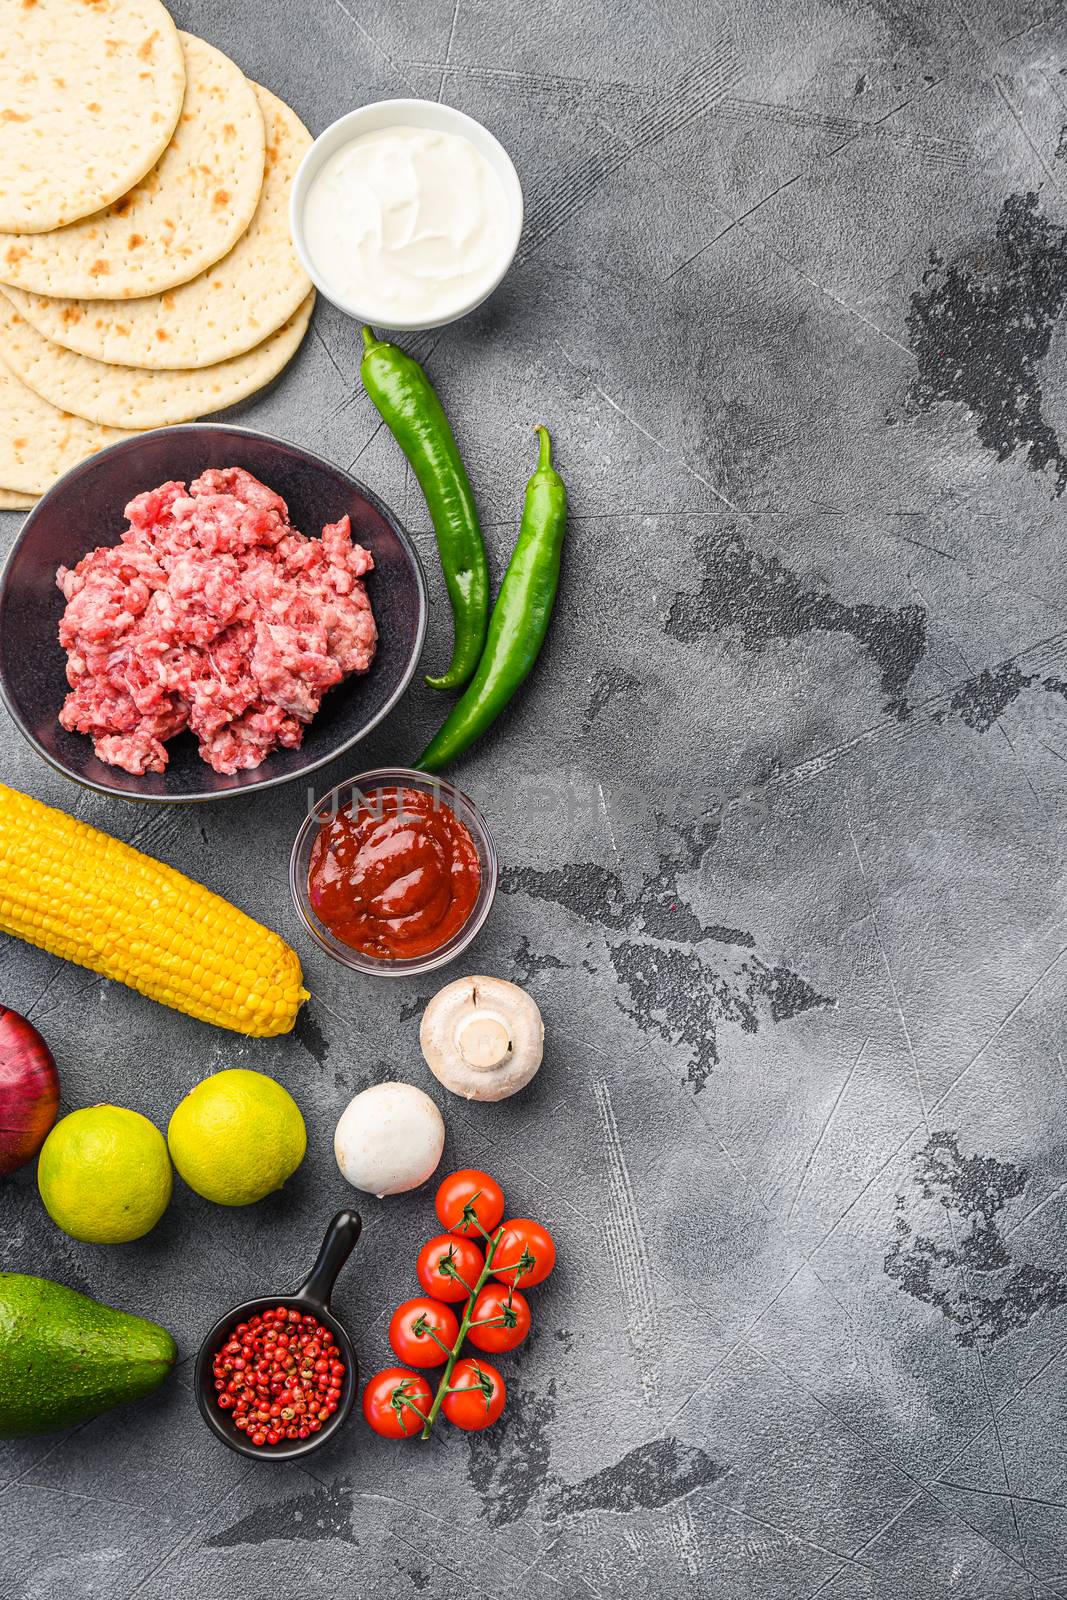 Ingredients for beef meat mexican tacos , corn tortillas, chili pepper, avocado, meat on textured grey background, top view vertical with space for text